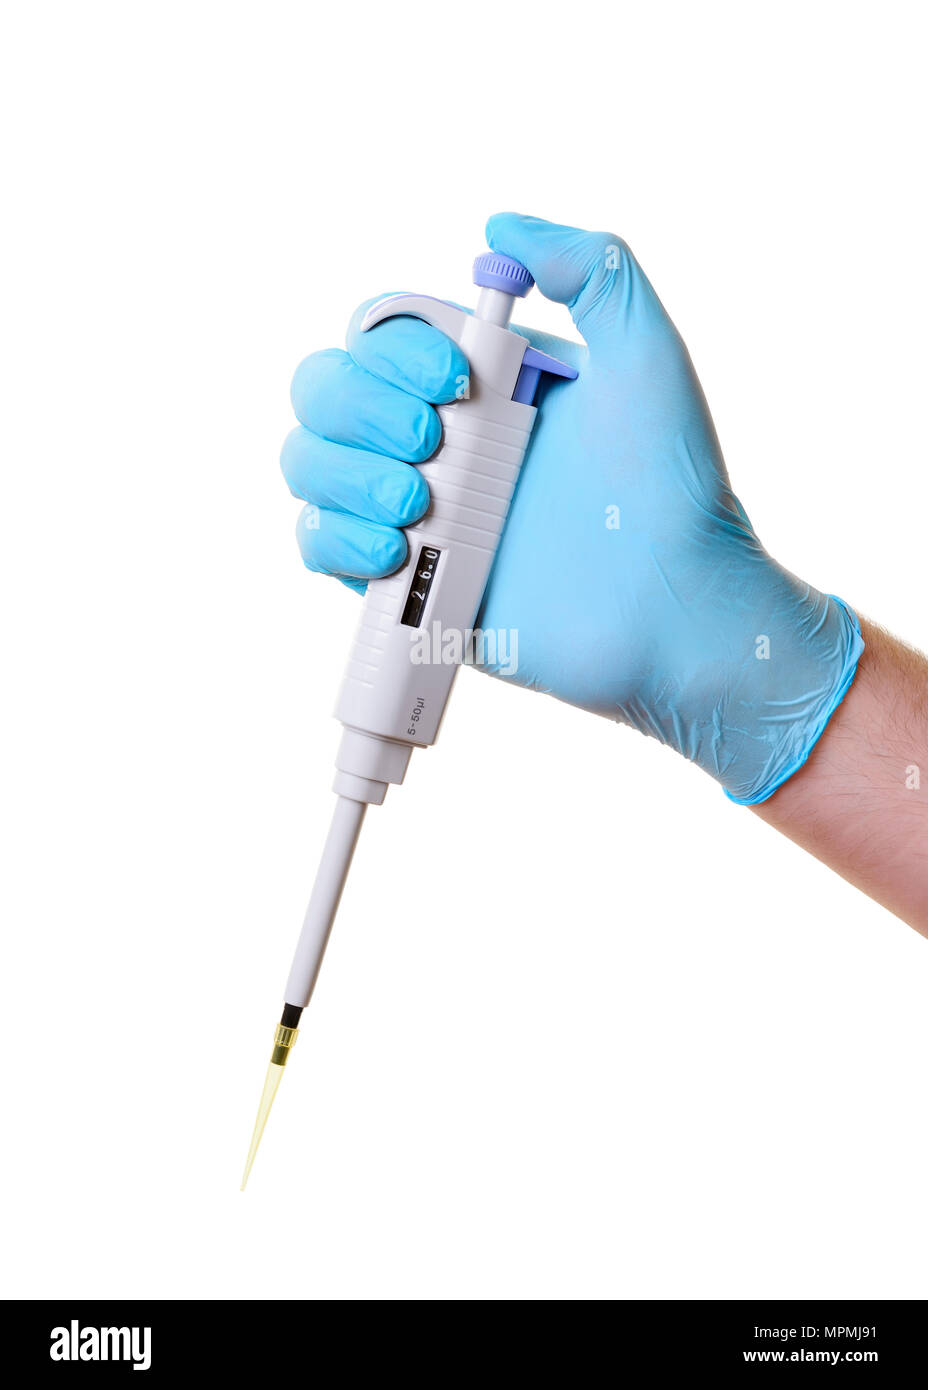 Pipette, Adjustable Volume Micropipette, Cut Out Stock Photo